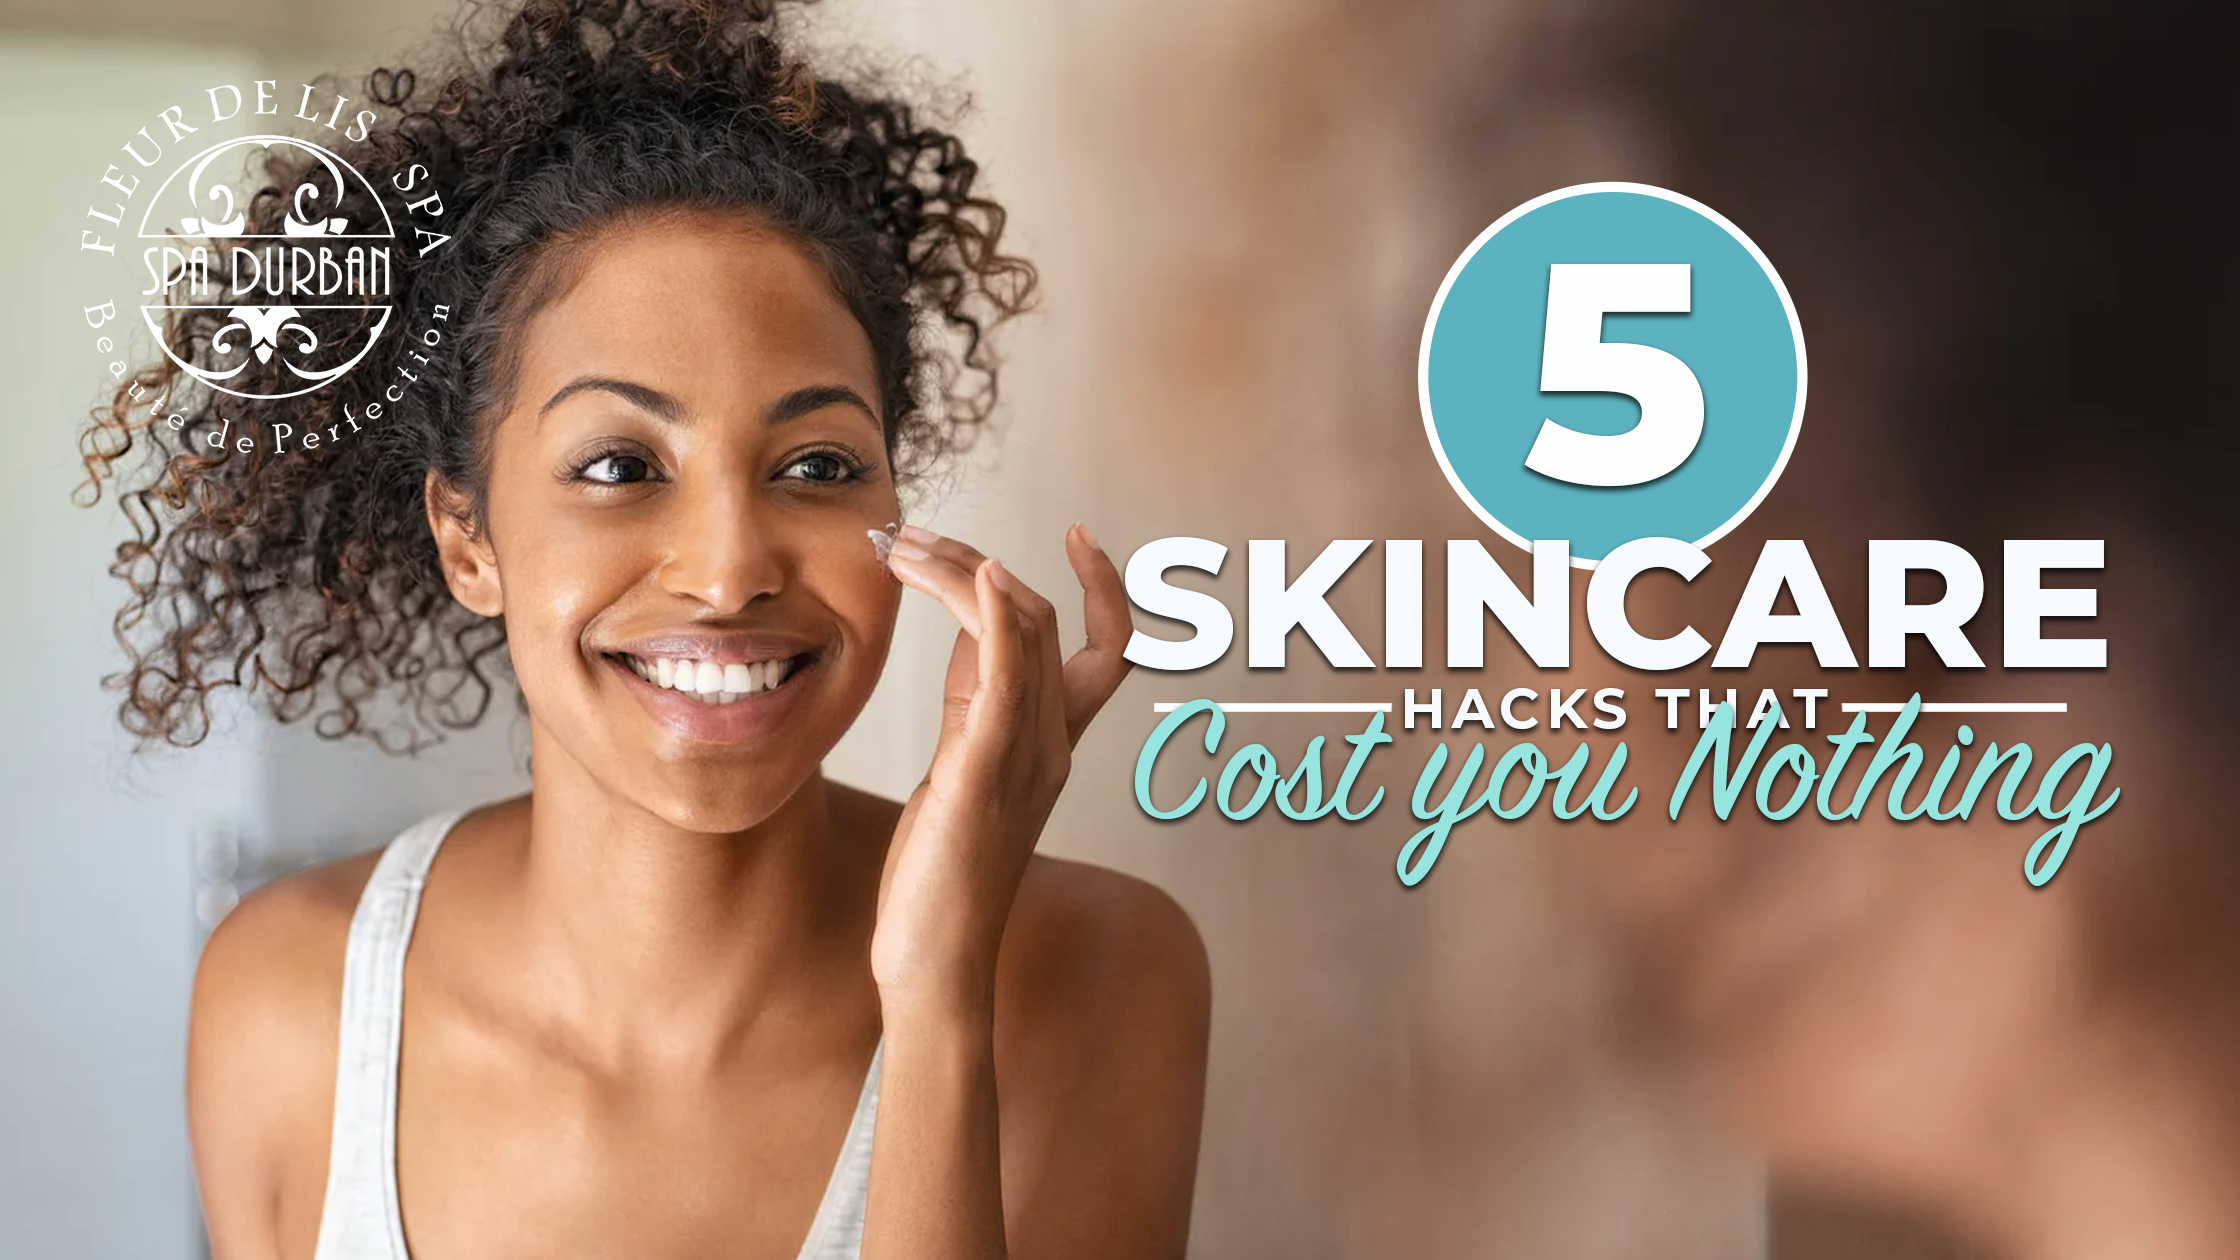 5 Skincare Hacks that Cost you Nothing